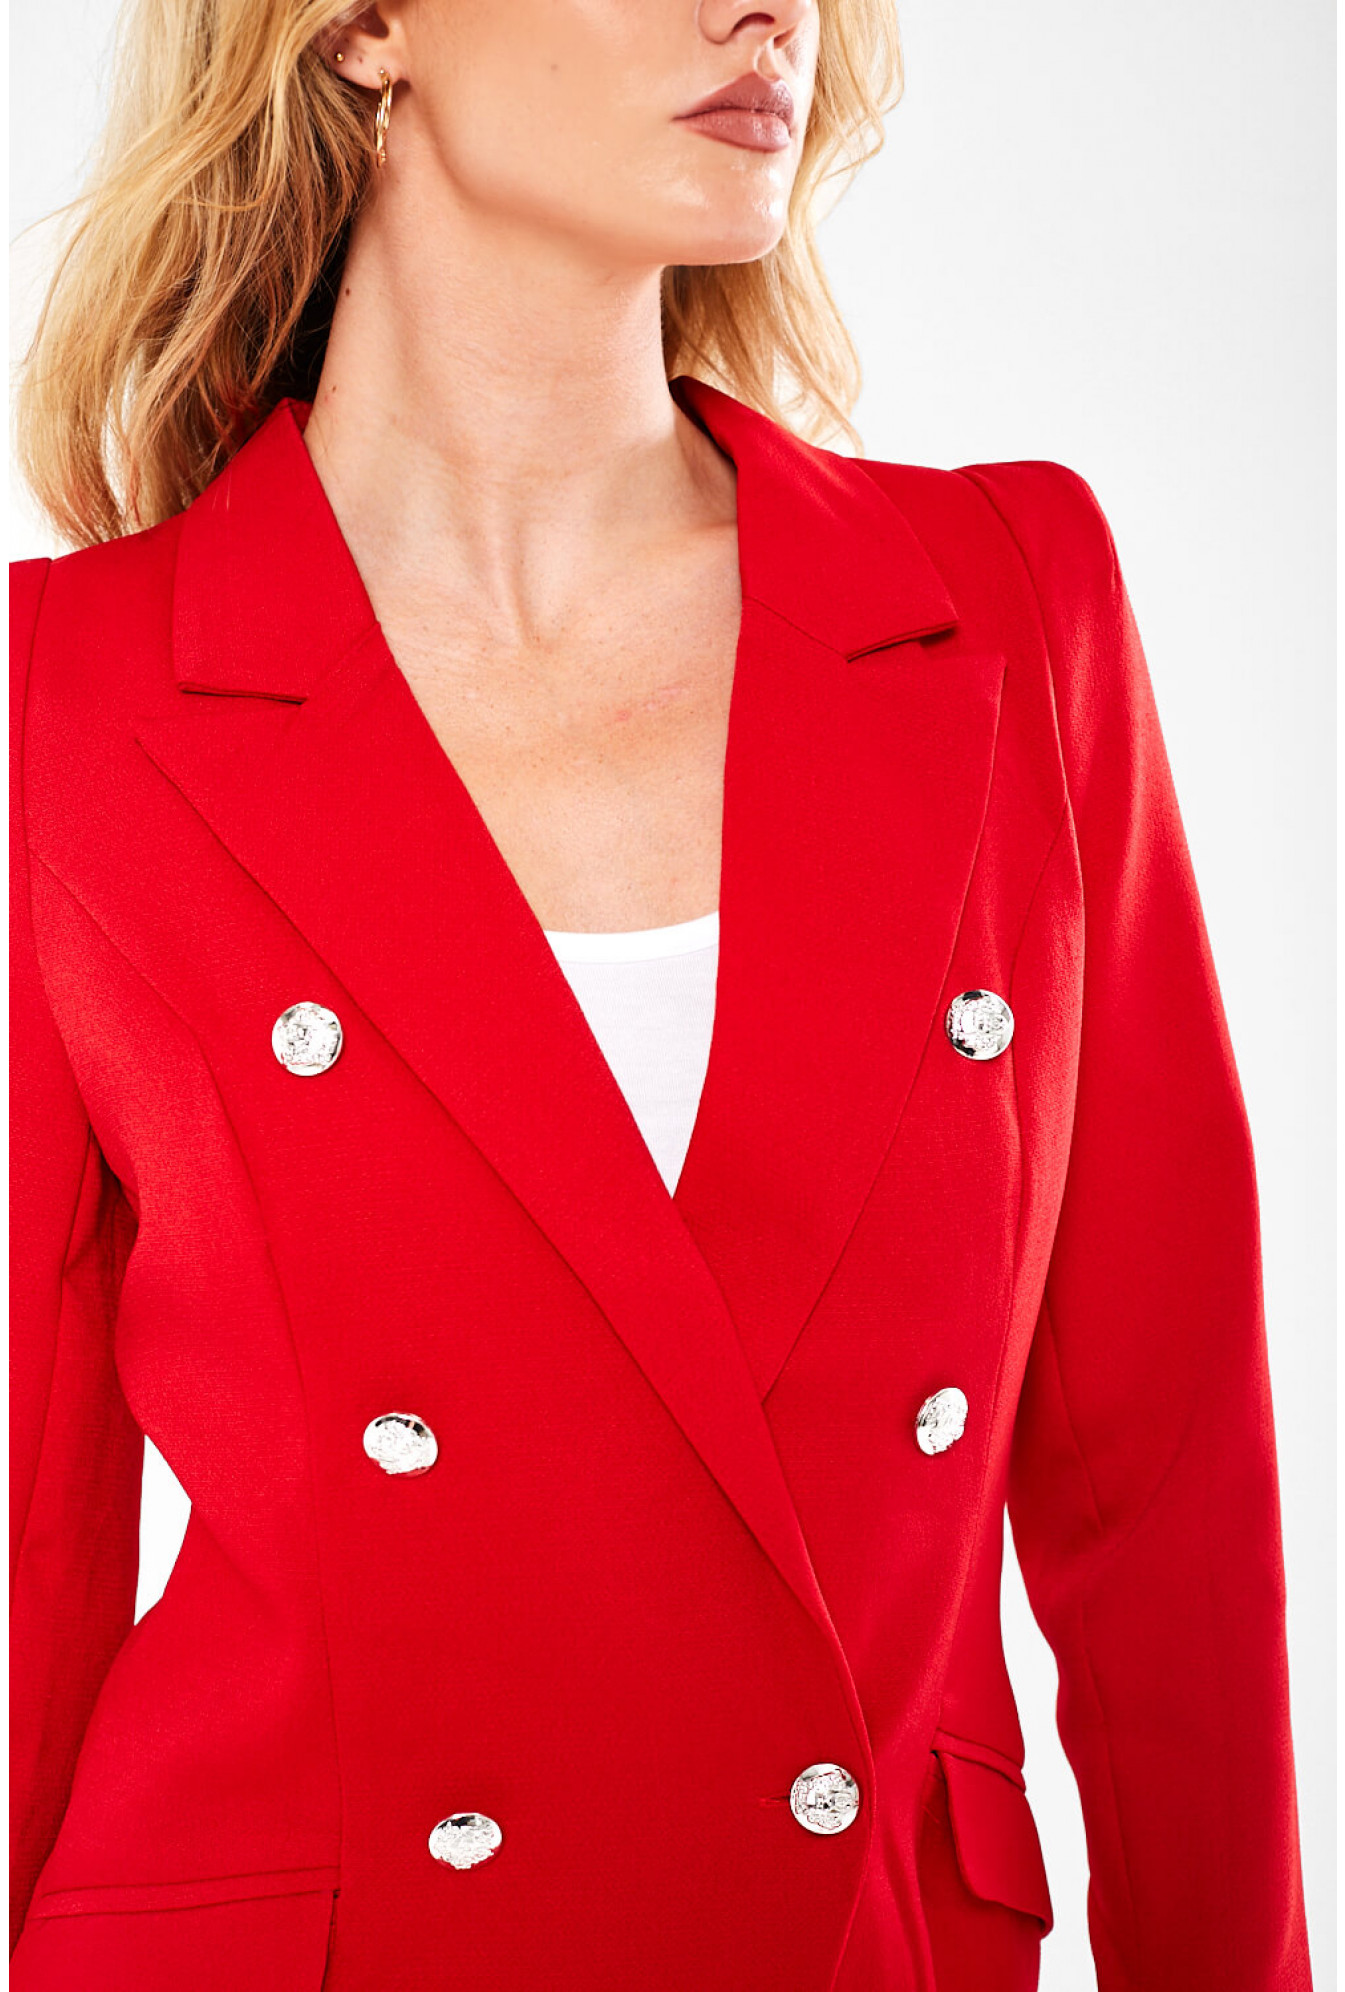 Marc Angelo Tess Military Blazer in Red | iCLOTHING